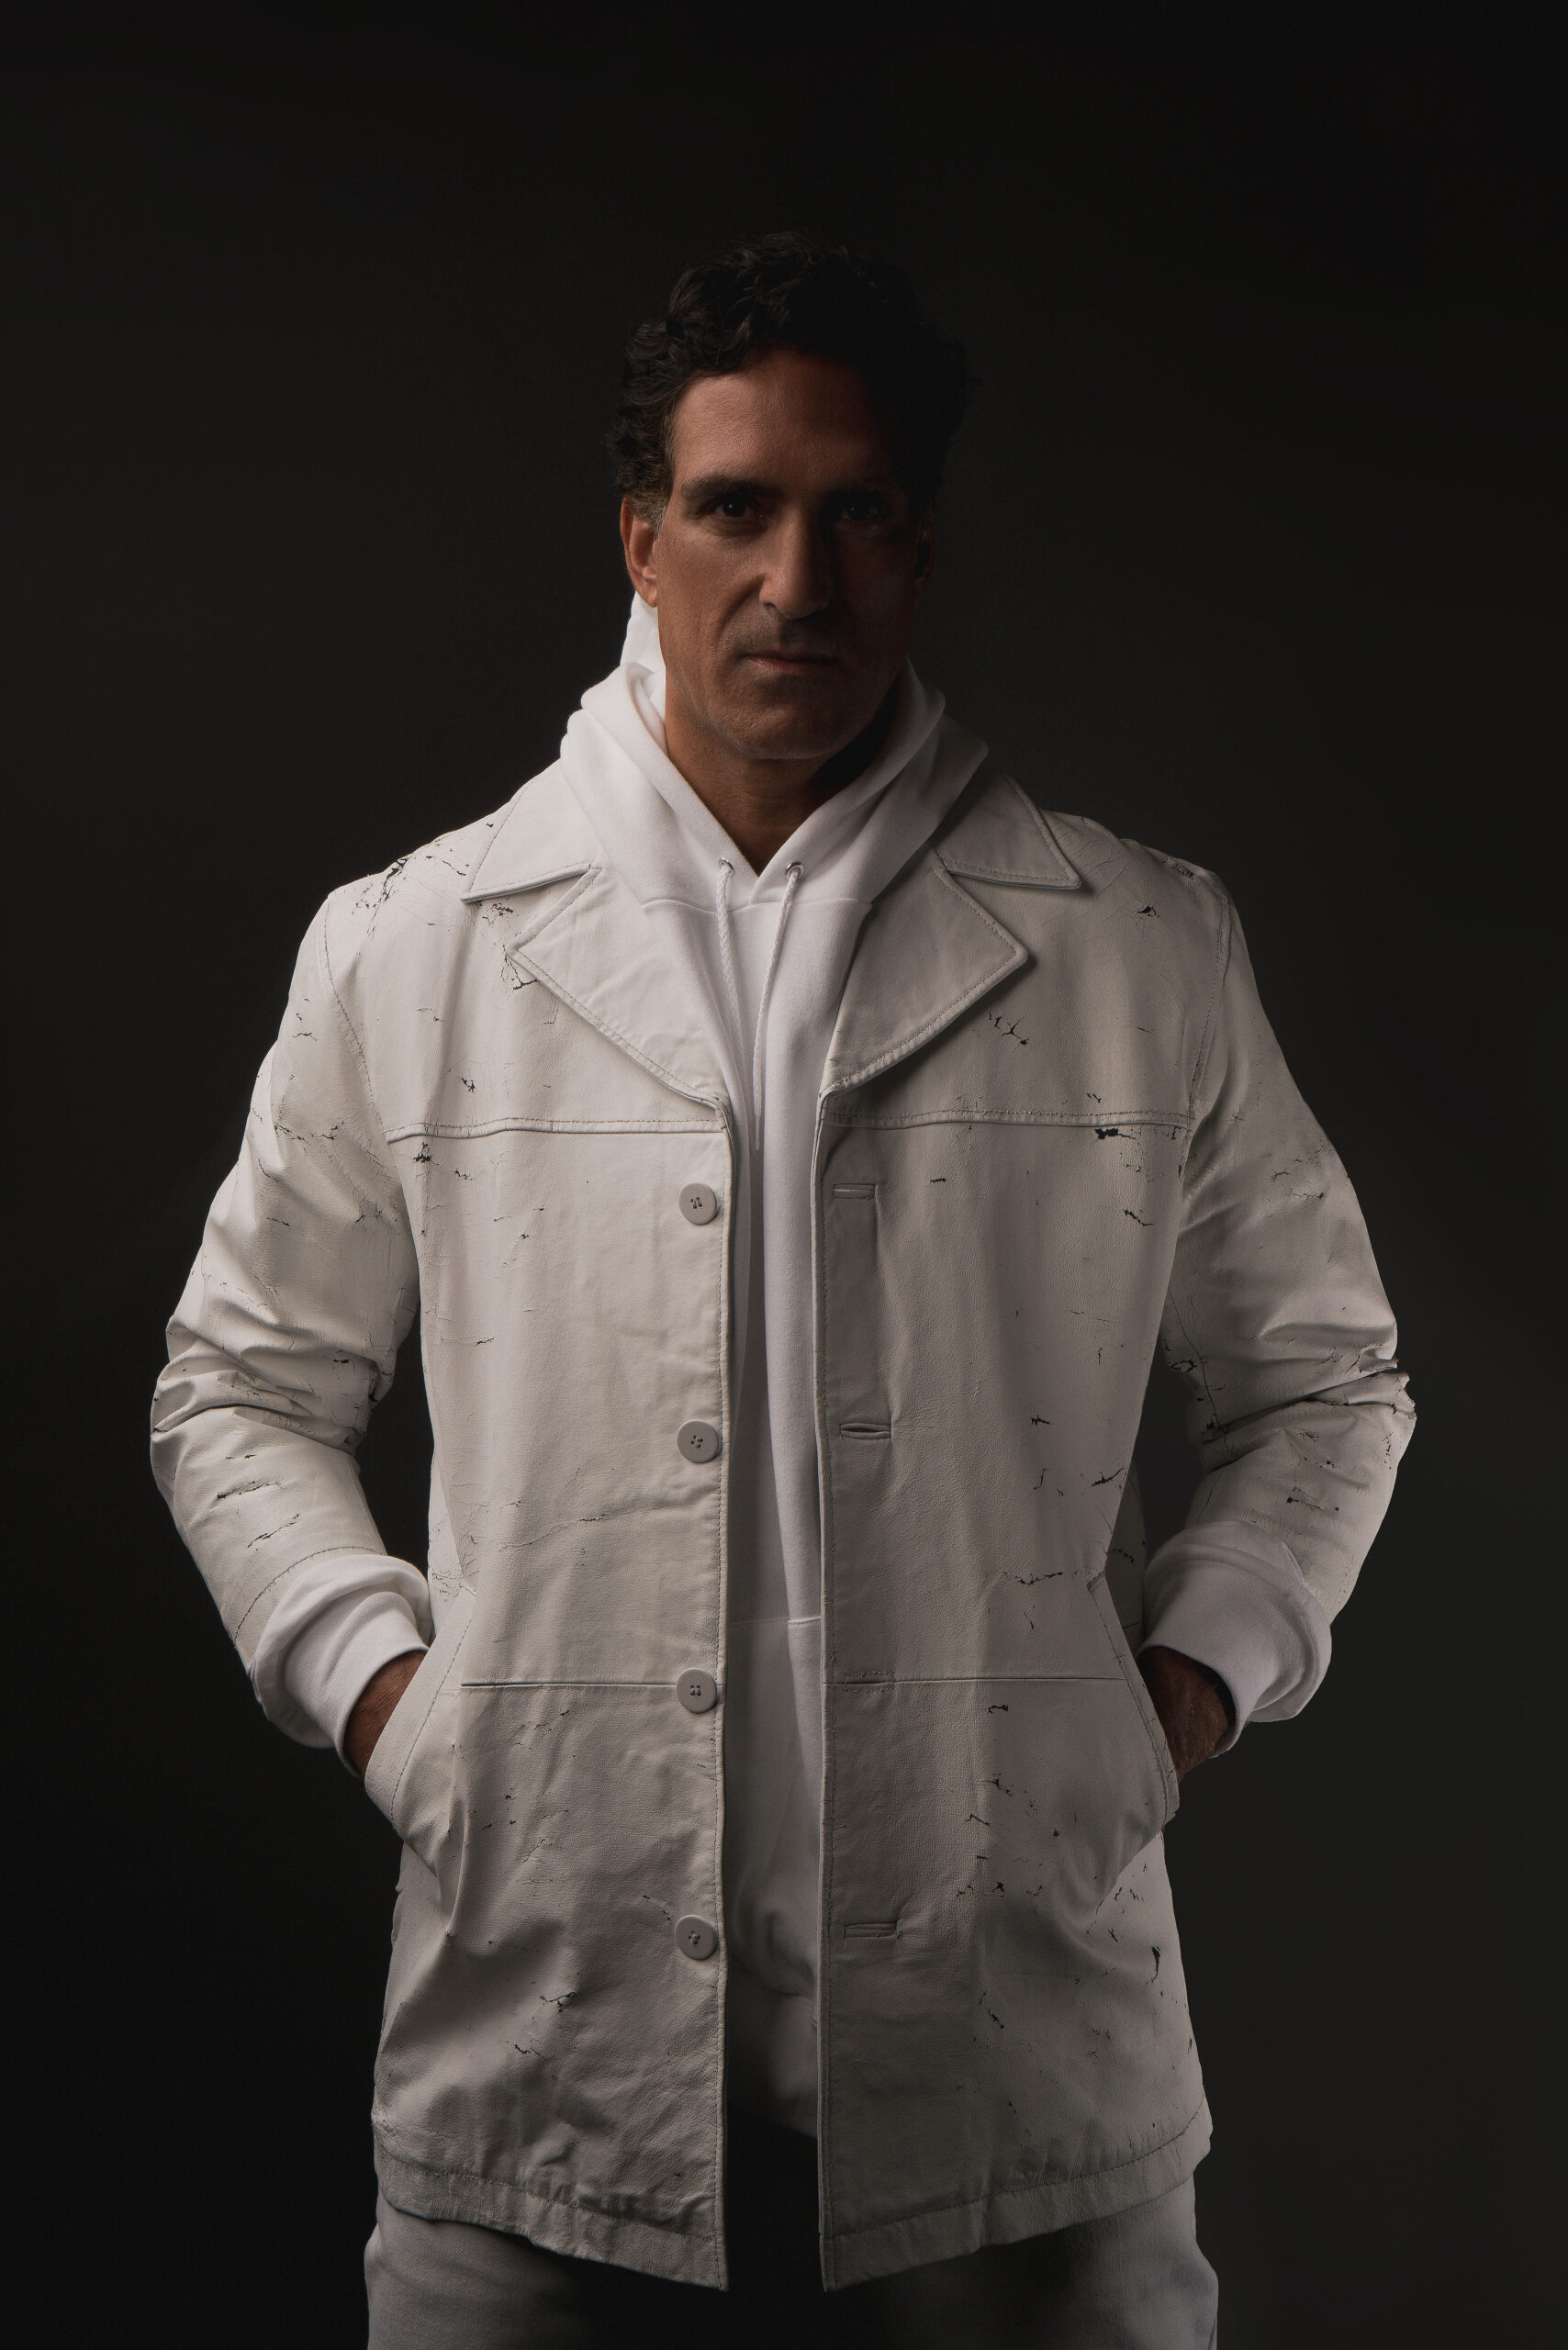 A Day in the Life of...Rony Seikaly